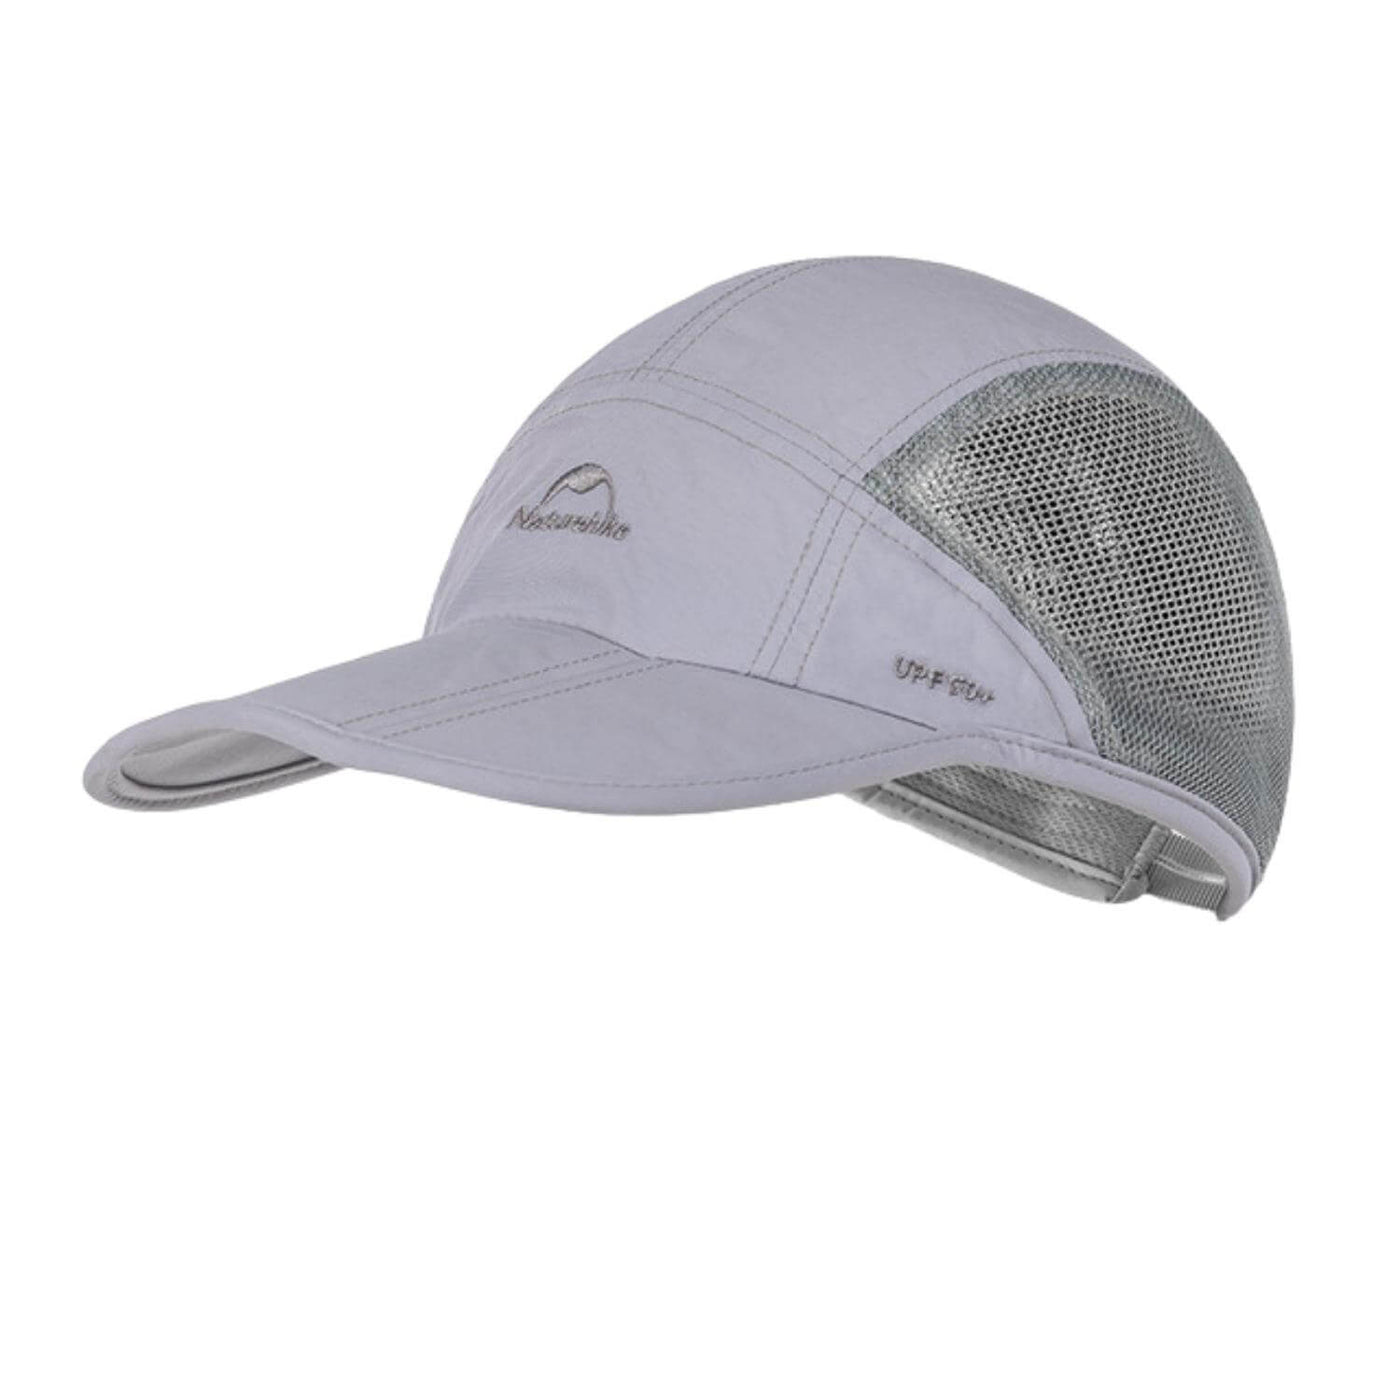 Ultralight cap with UV protection